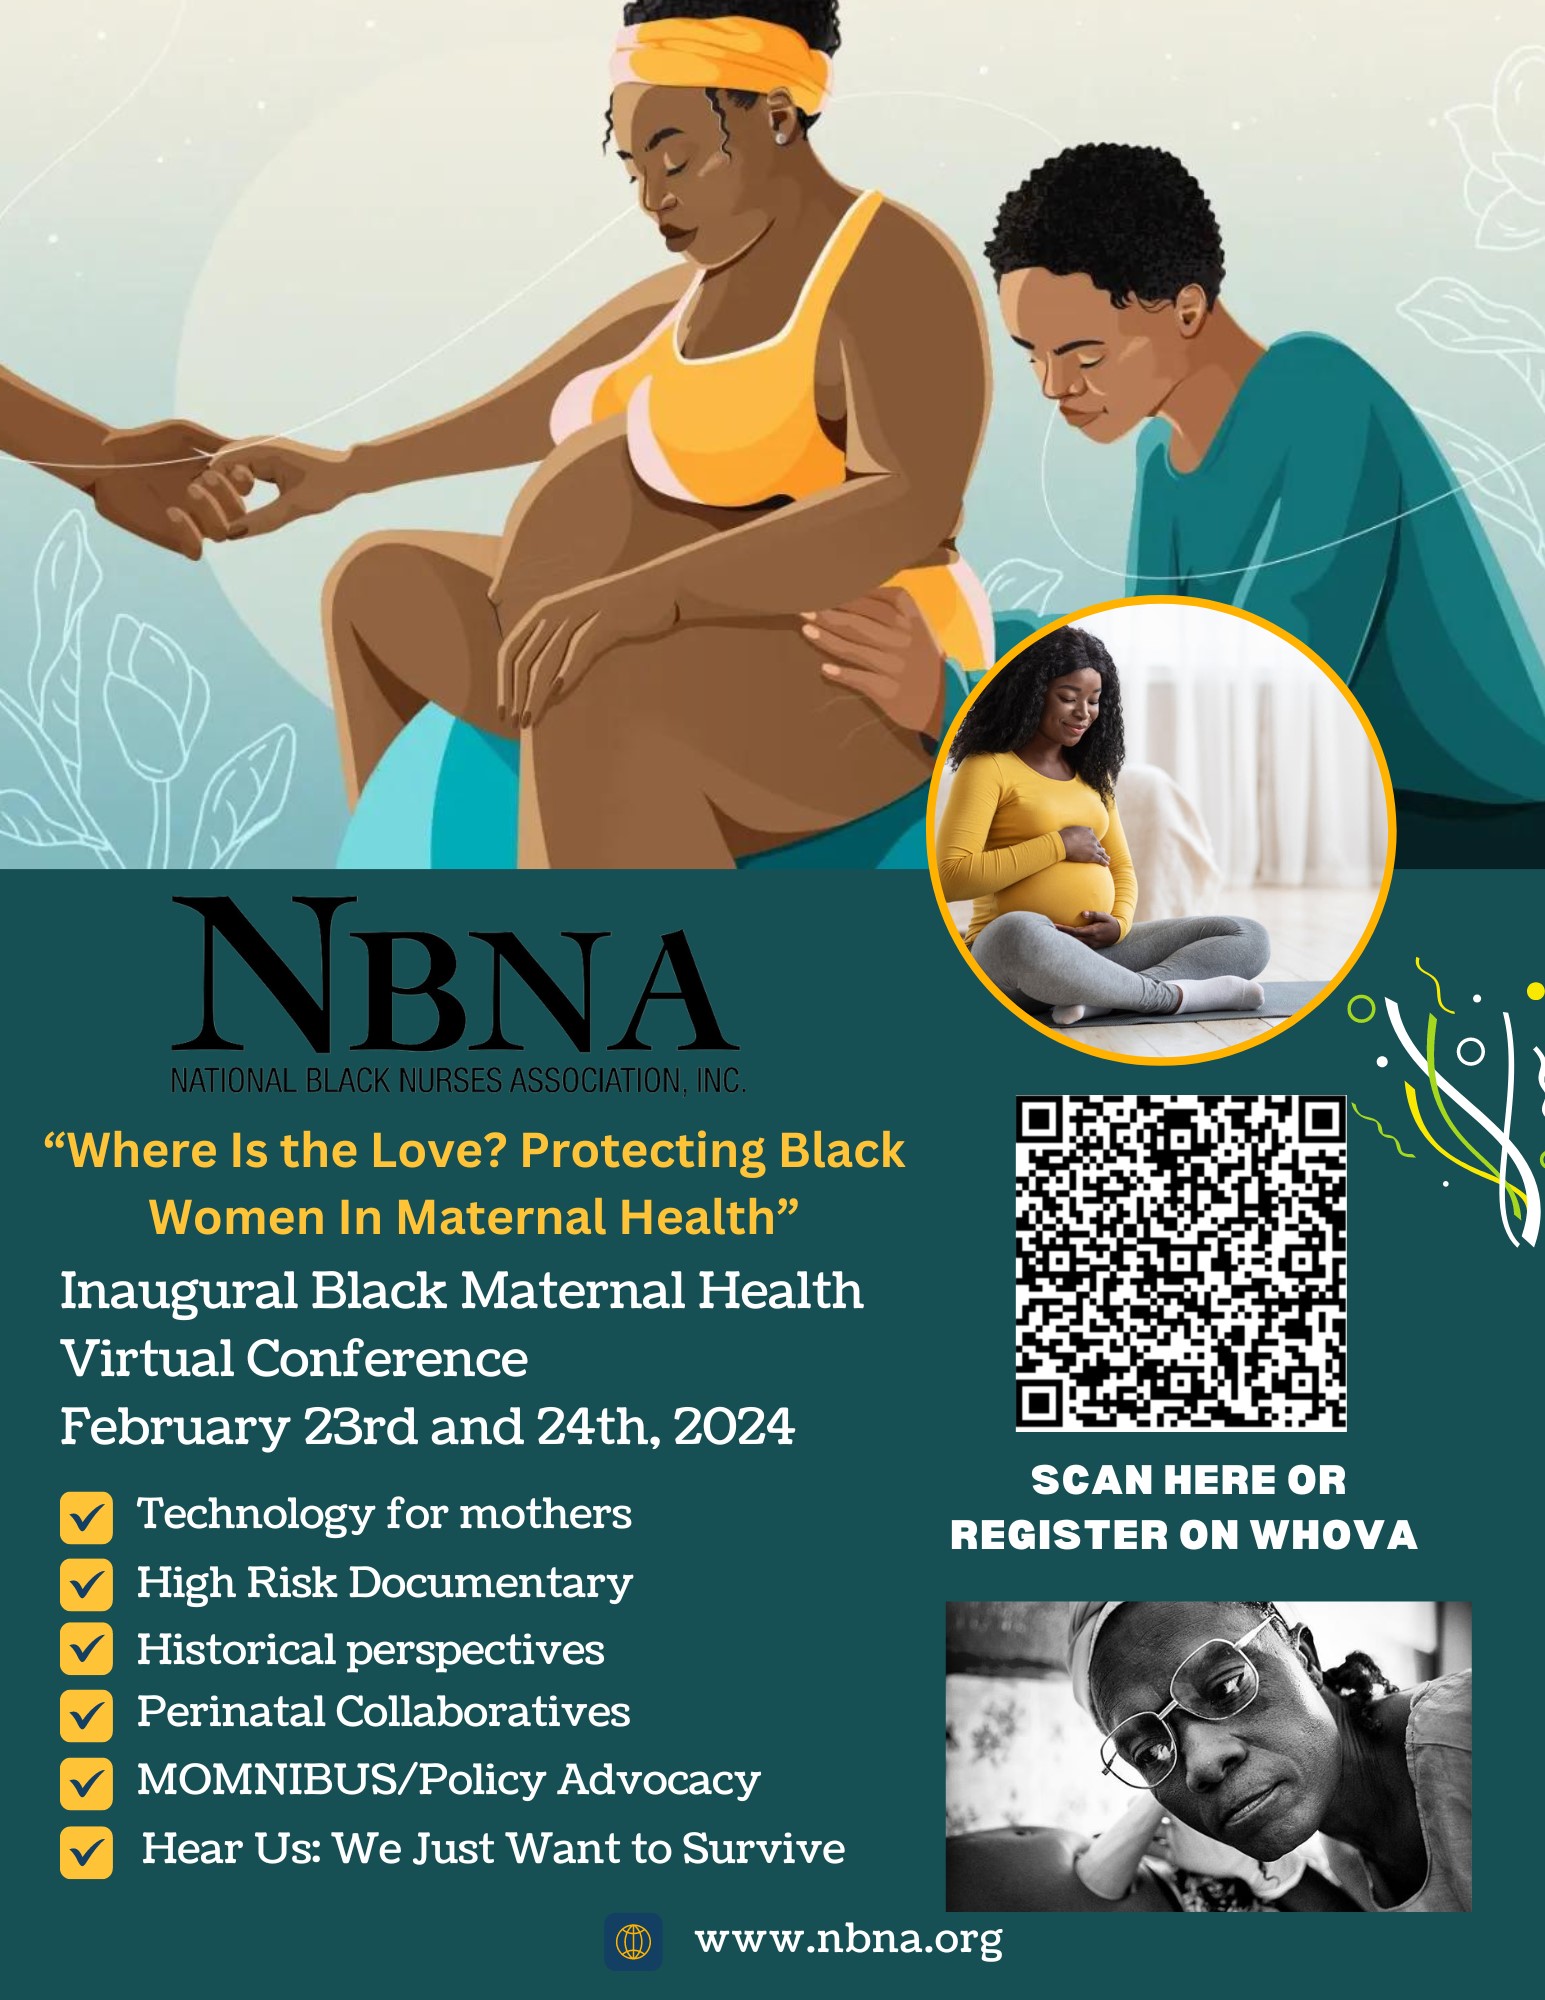 Black Birthing person giving birth supported by caregiver